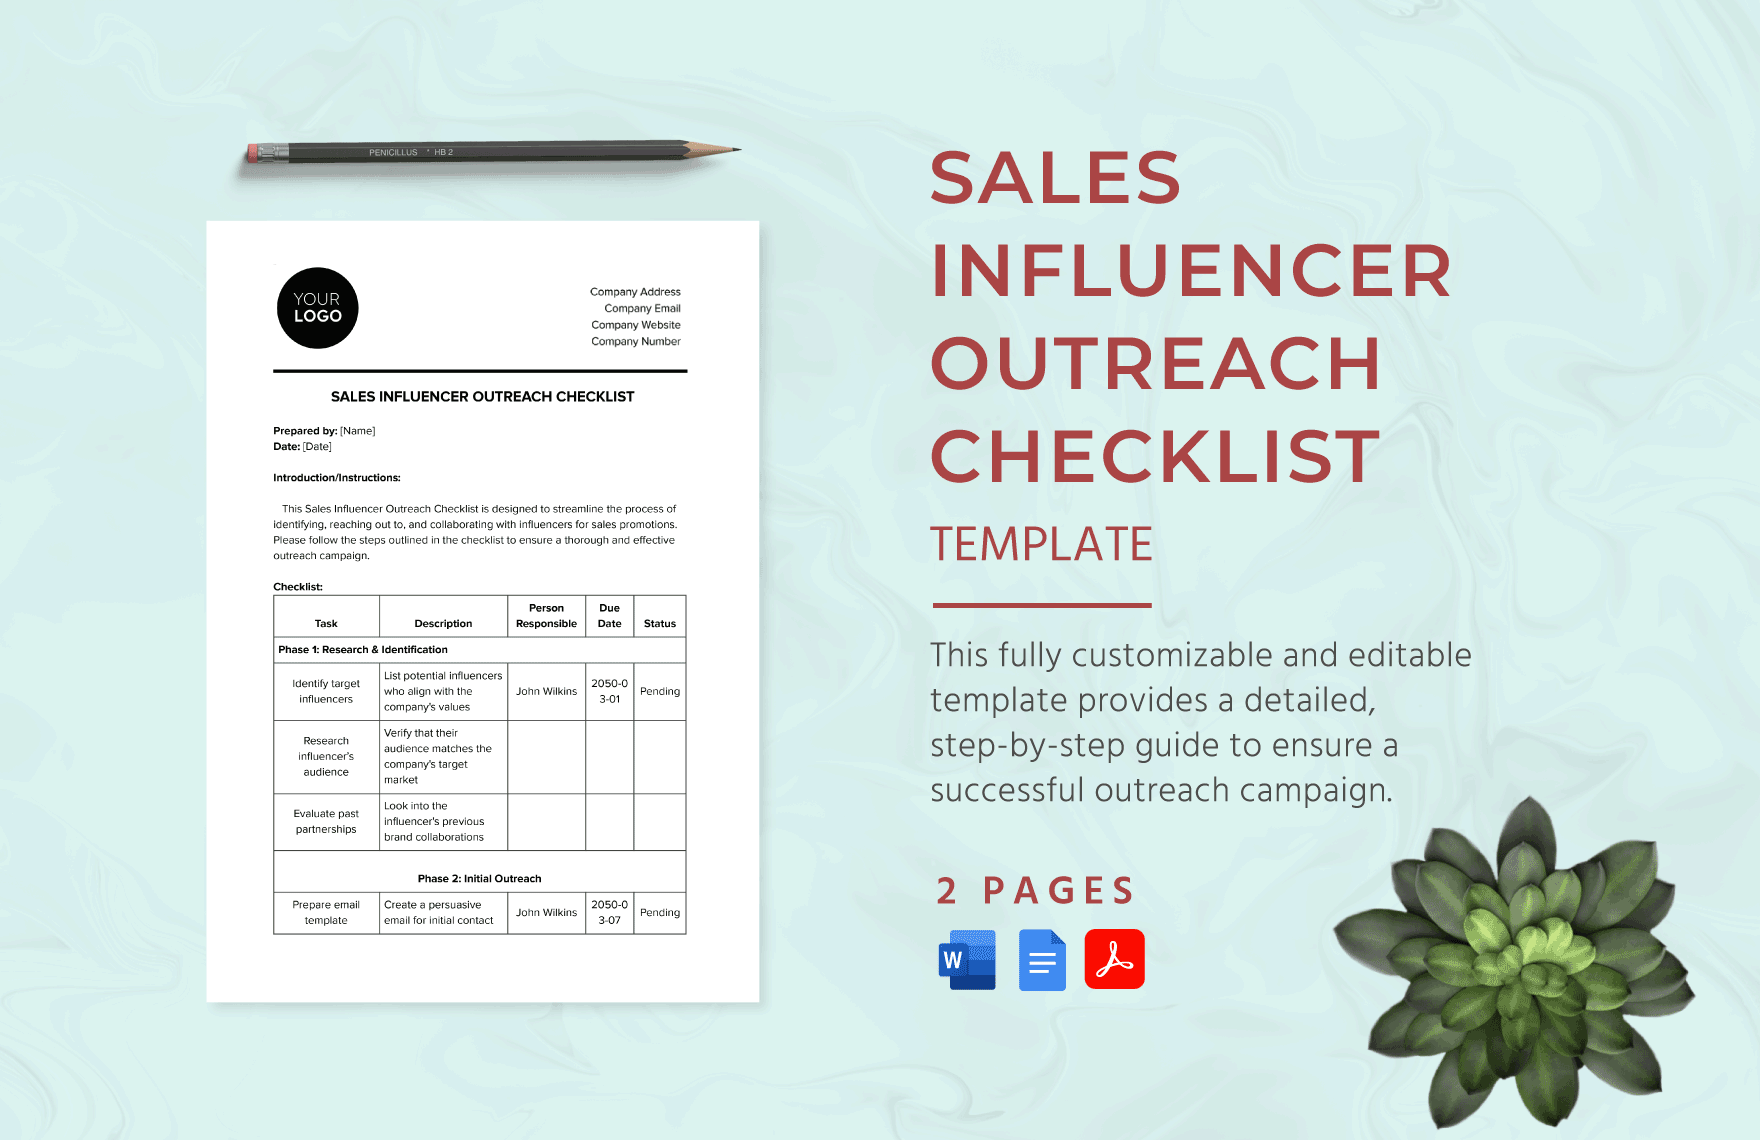 Sales Influencer Outreach Checklist Template in Word, Google Docs, PDF